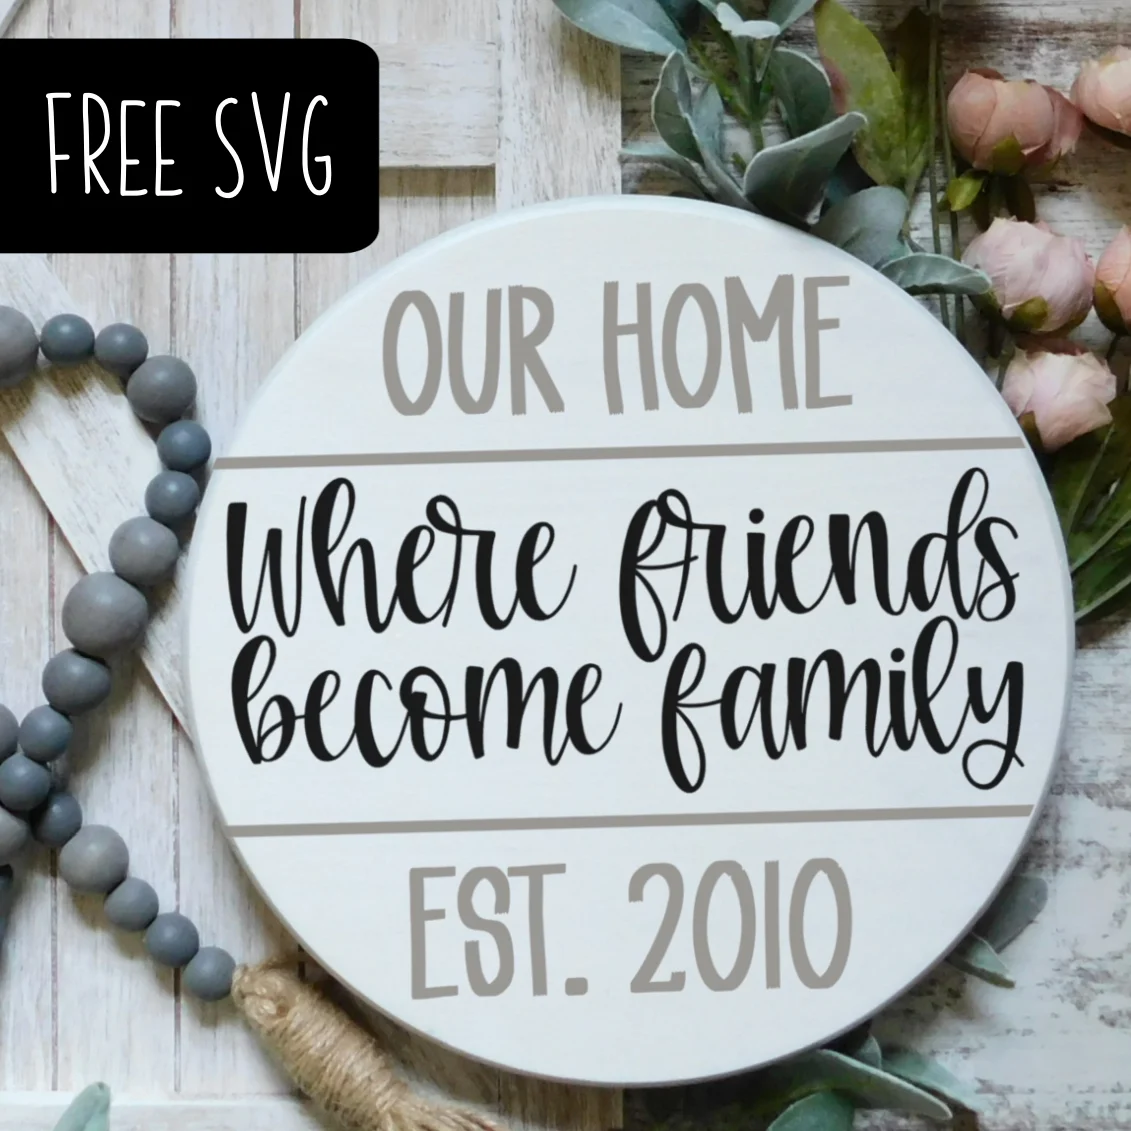 Free Wood Round SVG - Our Home - Where friends become family - For Silhouette Cameo and Cricut Maker - by cuttingforbusiness.com.